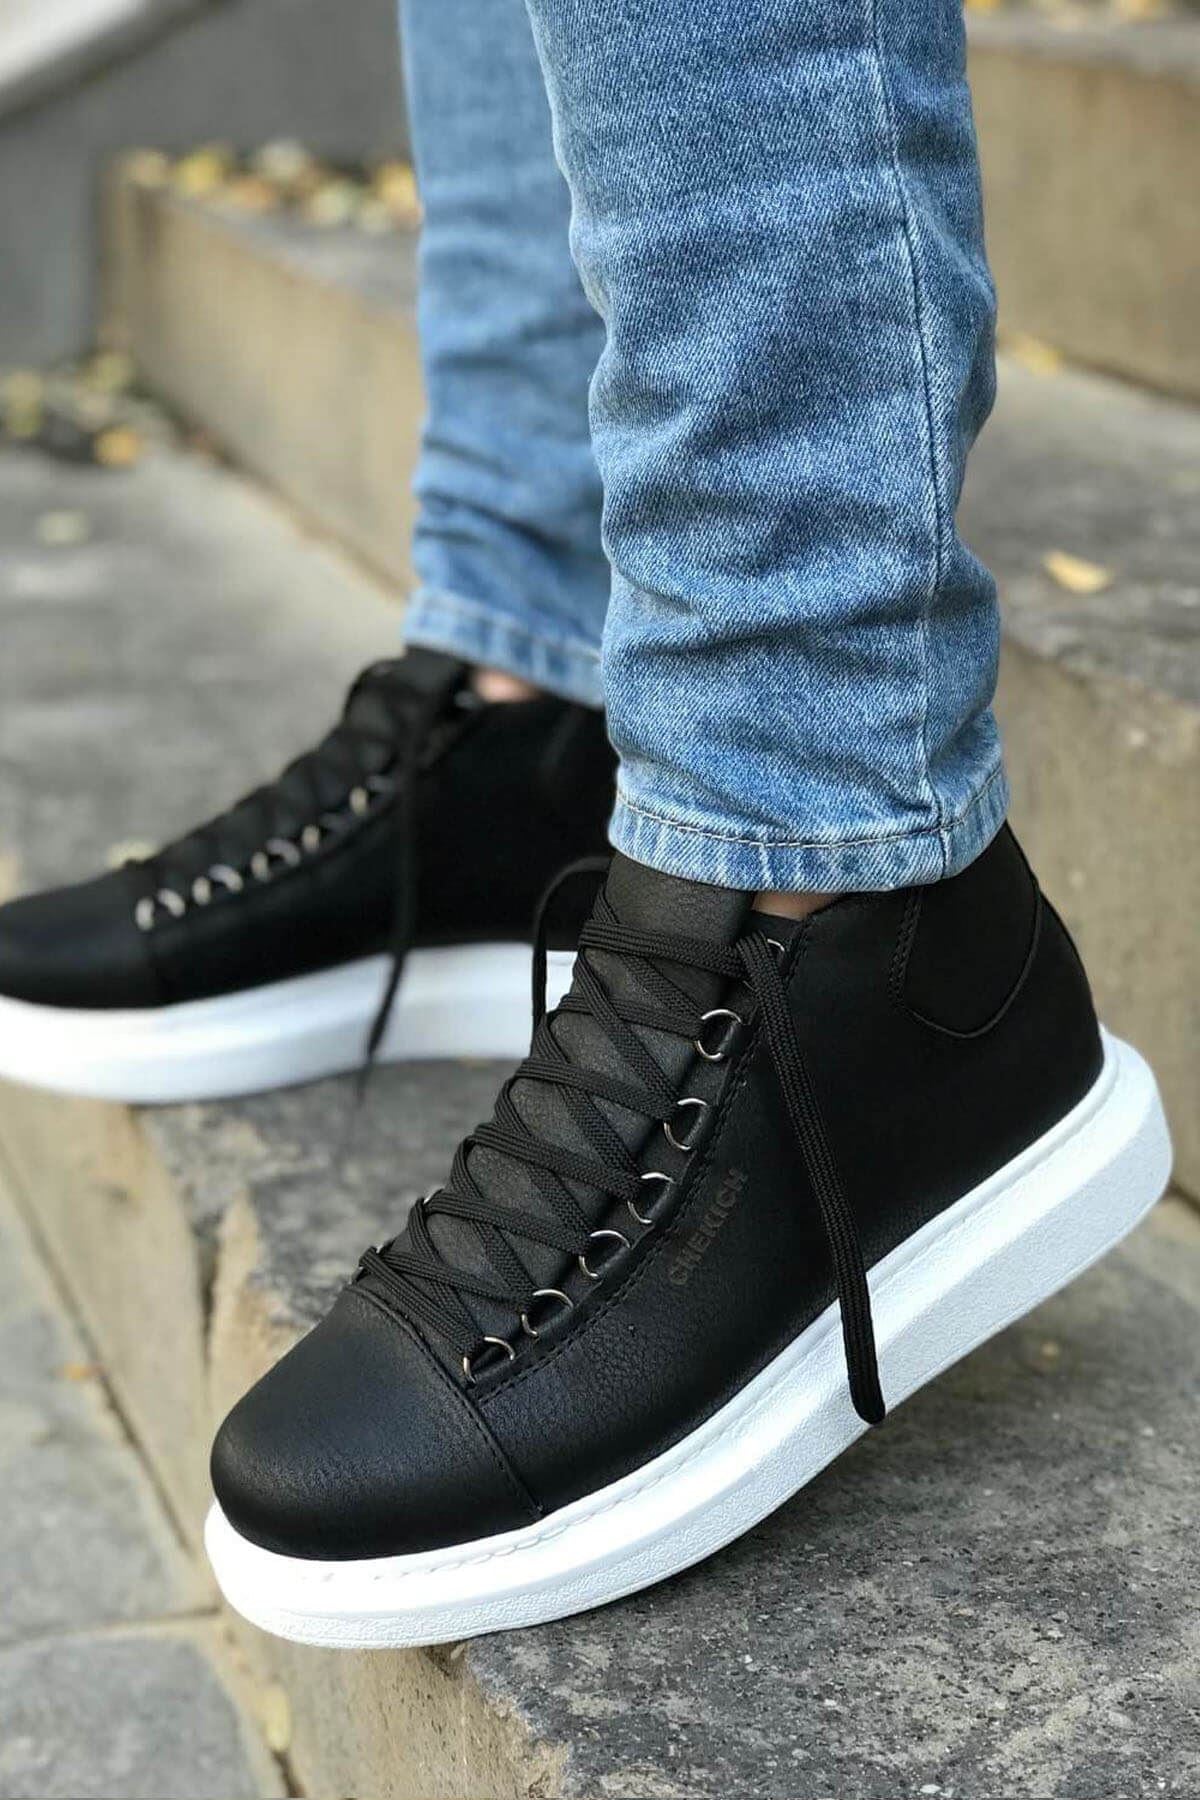 CH258 Men's Black-White Sole Metal Slug Lace-up High Sole Casual Sneaker Sports Boots - STREETMODE™